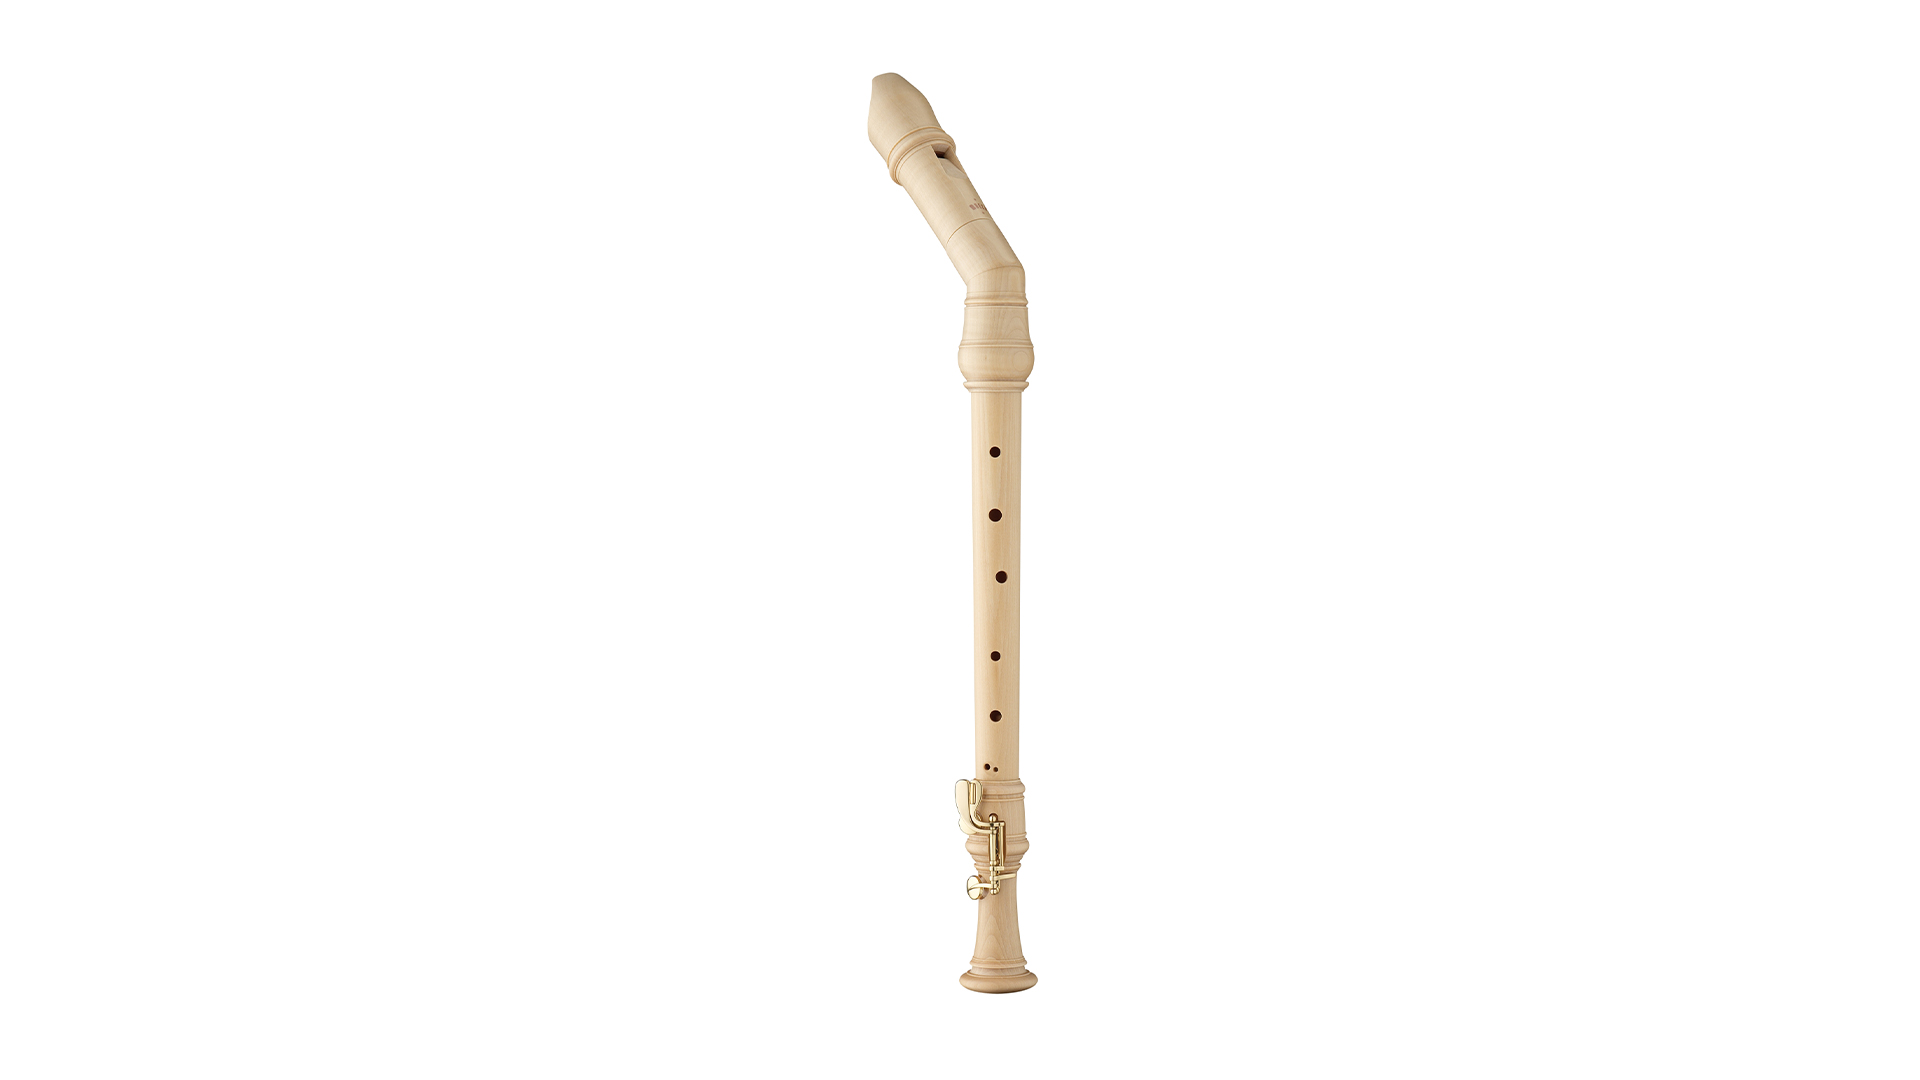 Moeck, "Rottenburgh", bent tenor in c', baroque double hole, double key, maple